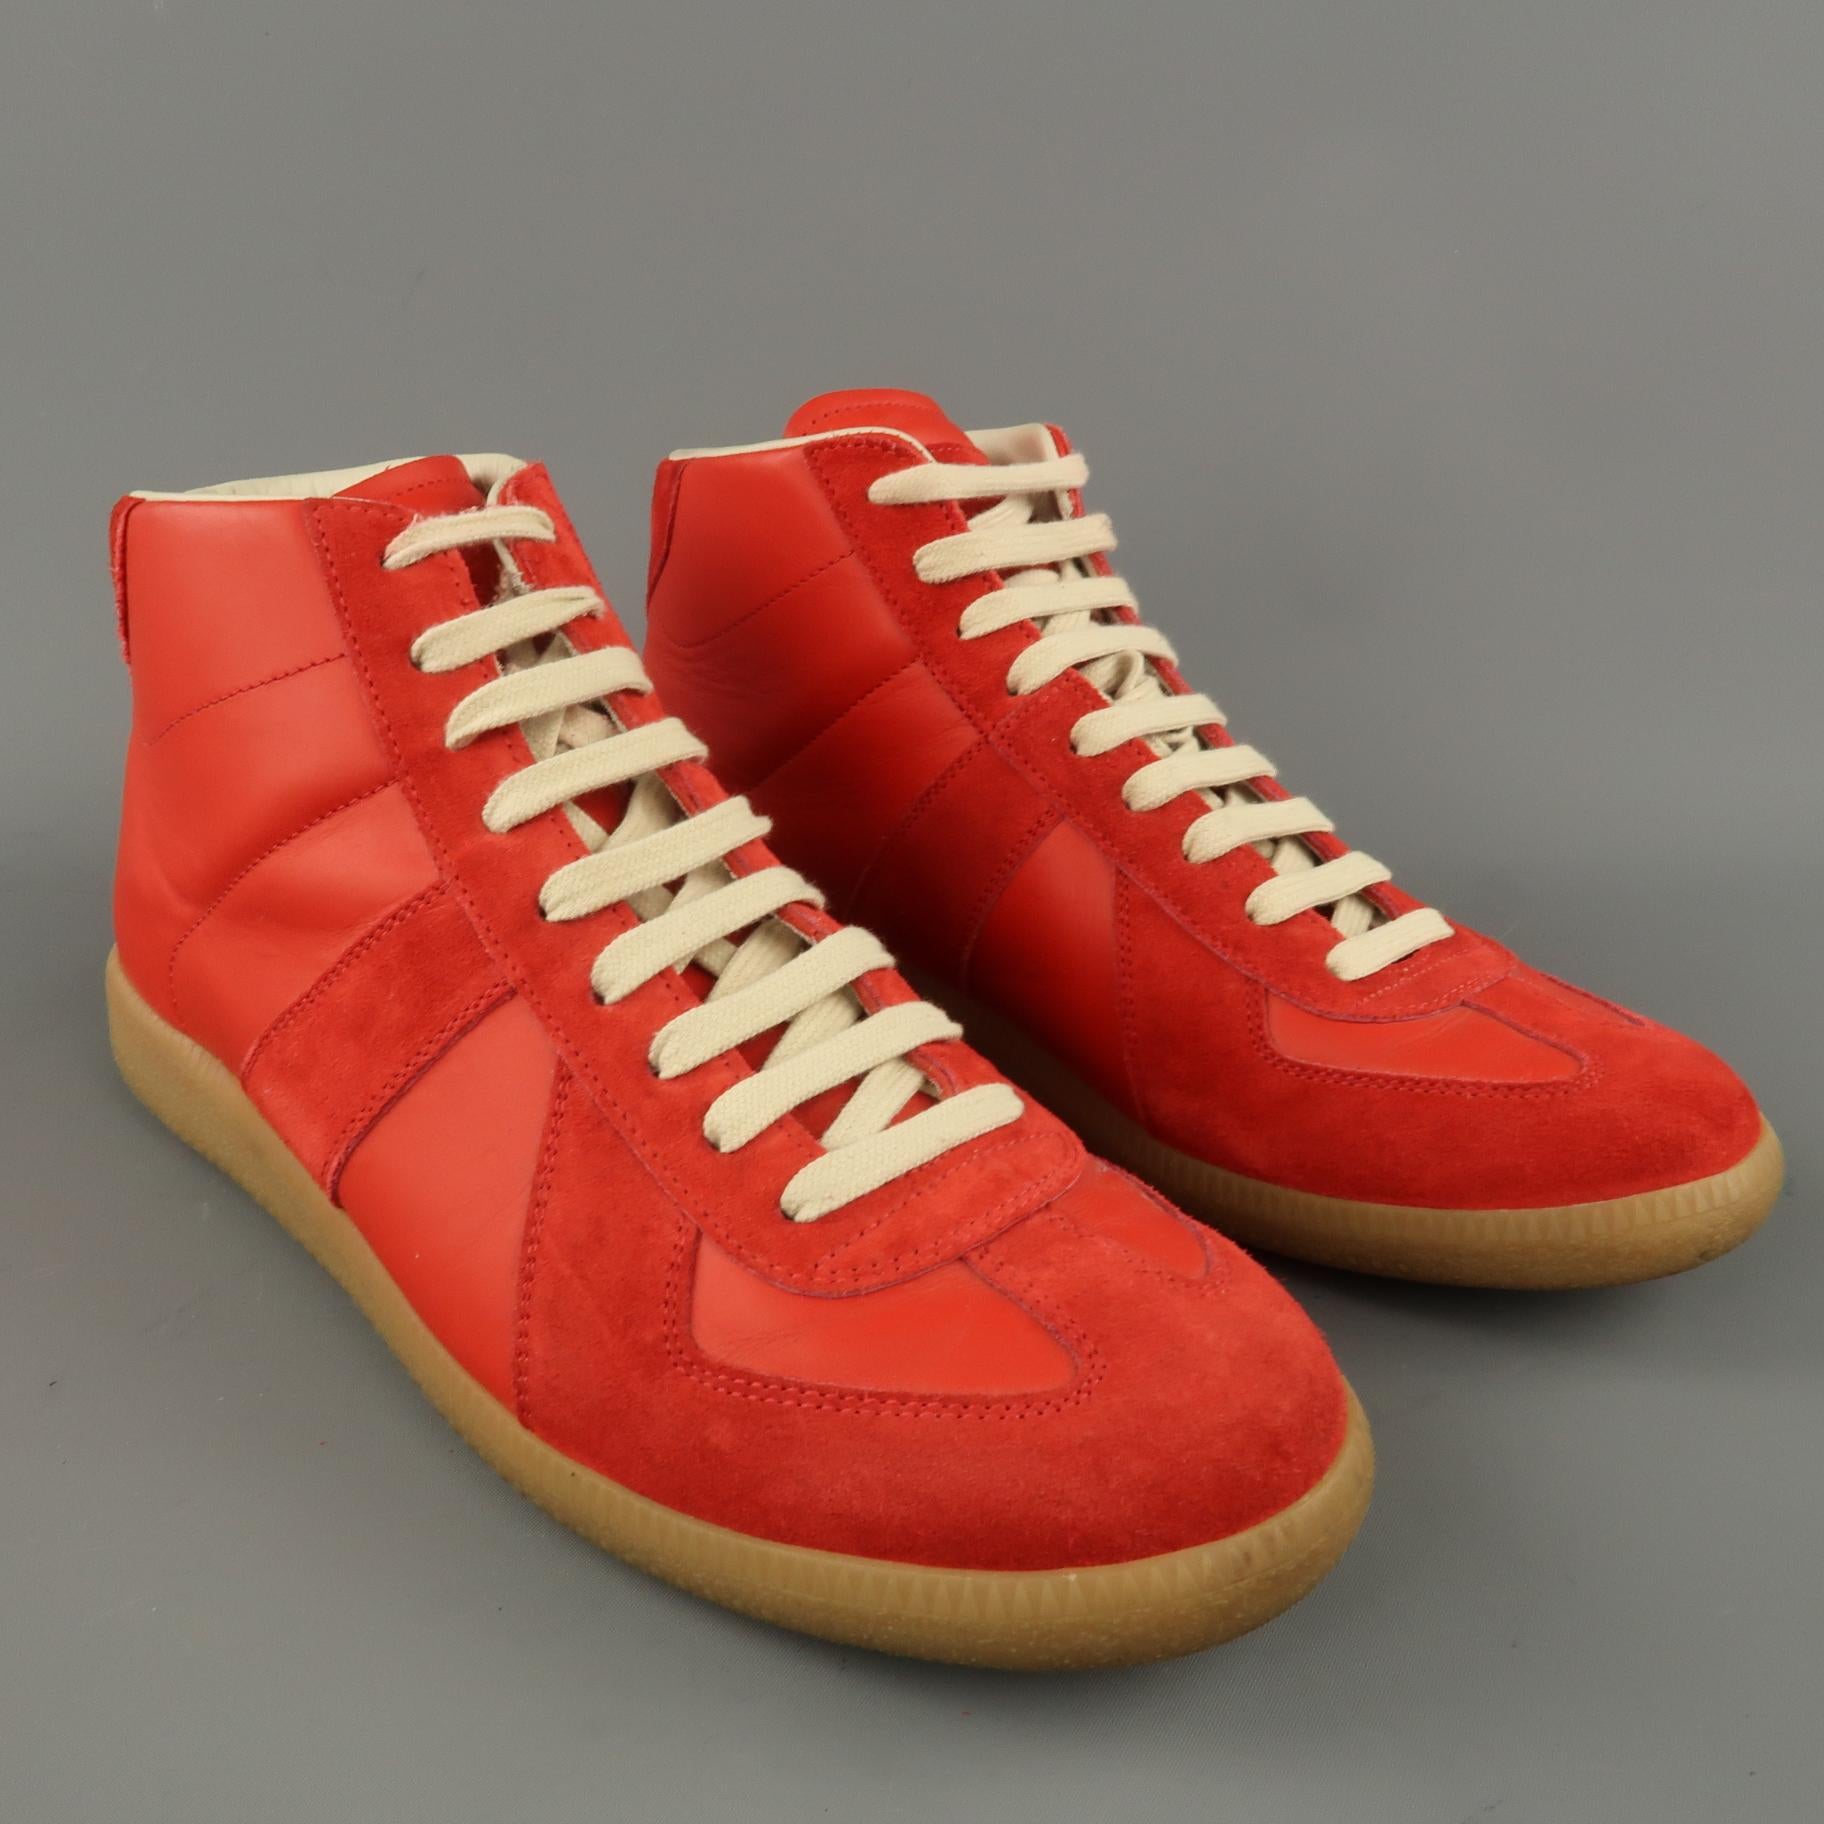 MAISON MARTIN MARGIELA Replica high top sneakers come in red leather with suede details, lace up front, and beige gum sole. Made in Italy.
 
Excellent Pre-Owned Condition.
Marked: IT 43 1/2
 
Outsole: 12 x 4 in.